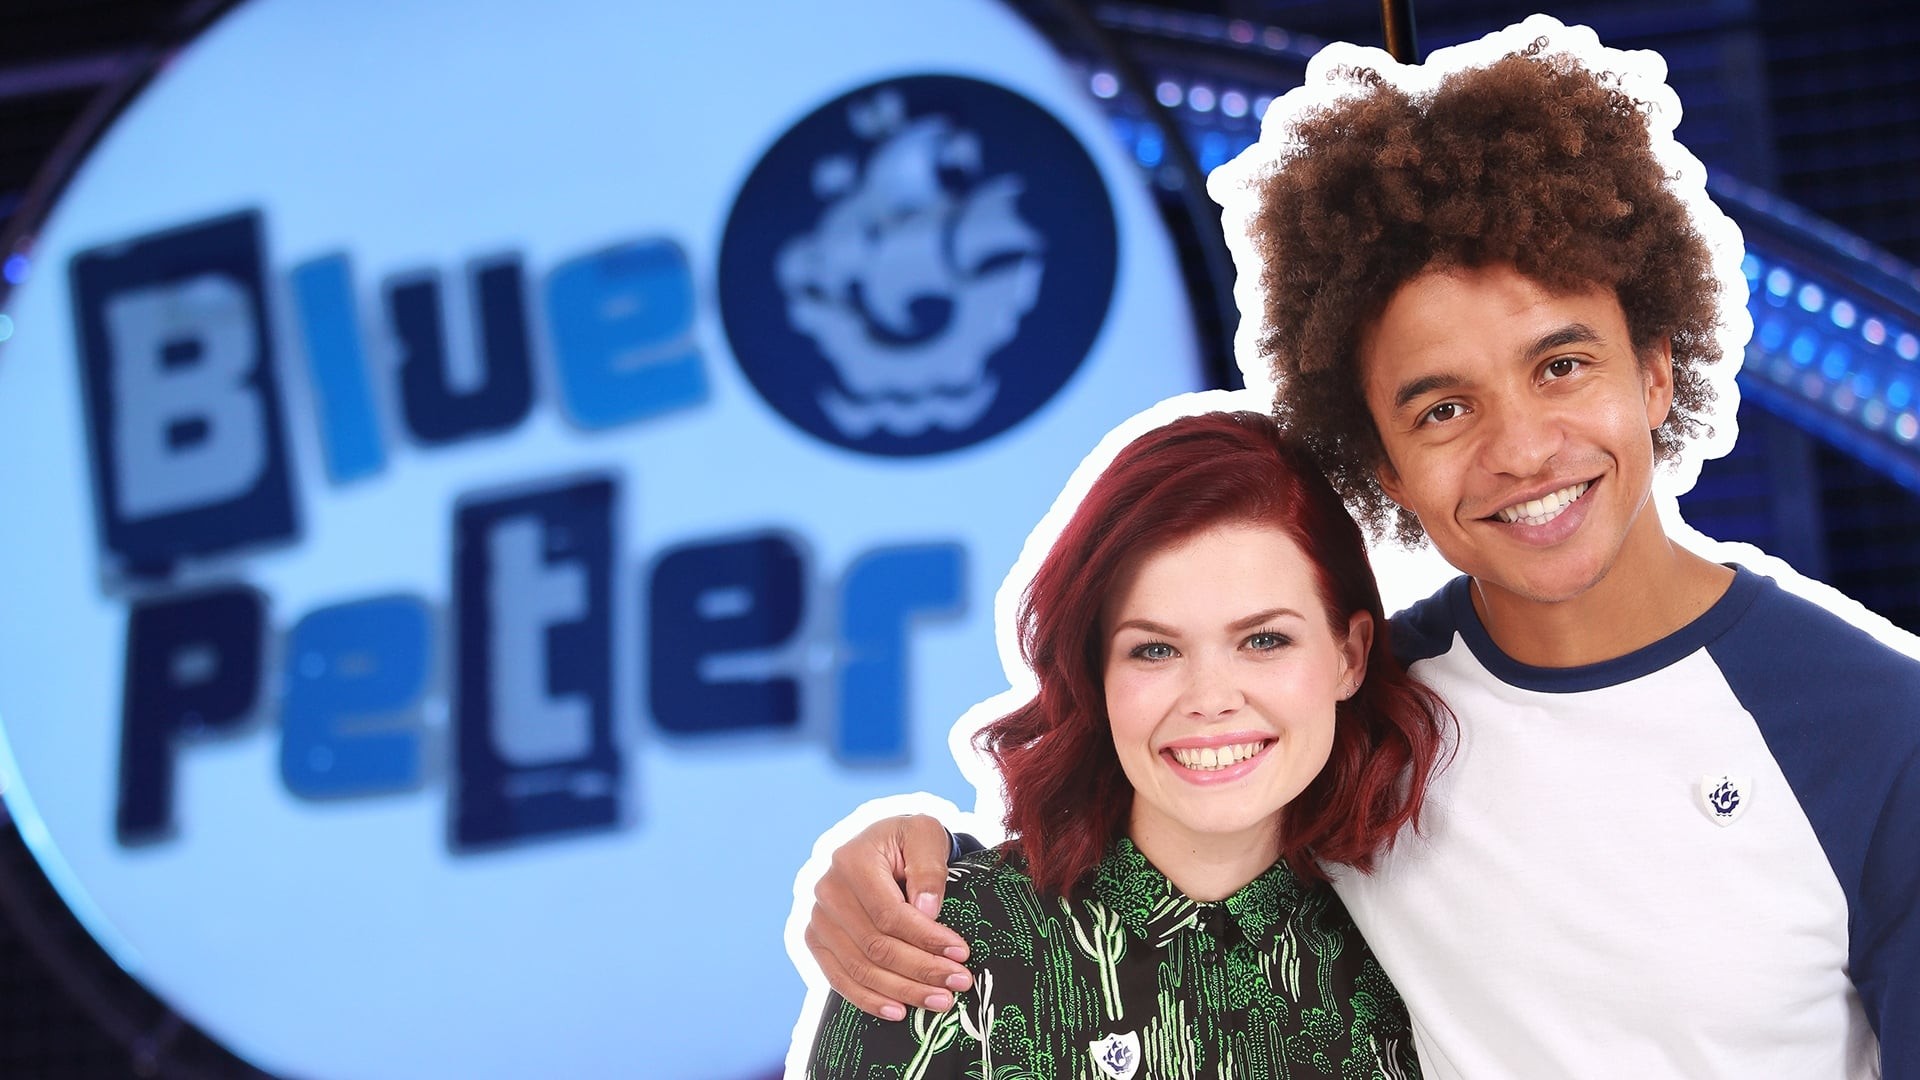 Blue Peter background